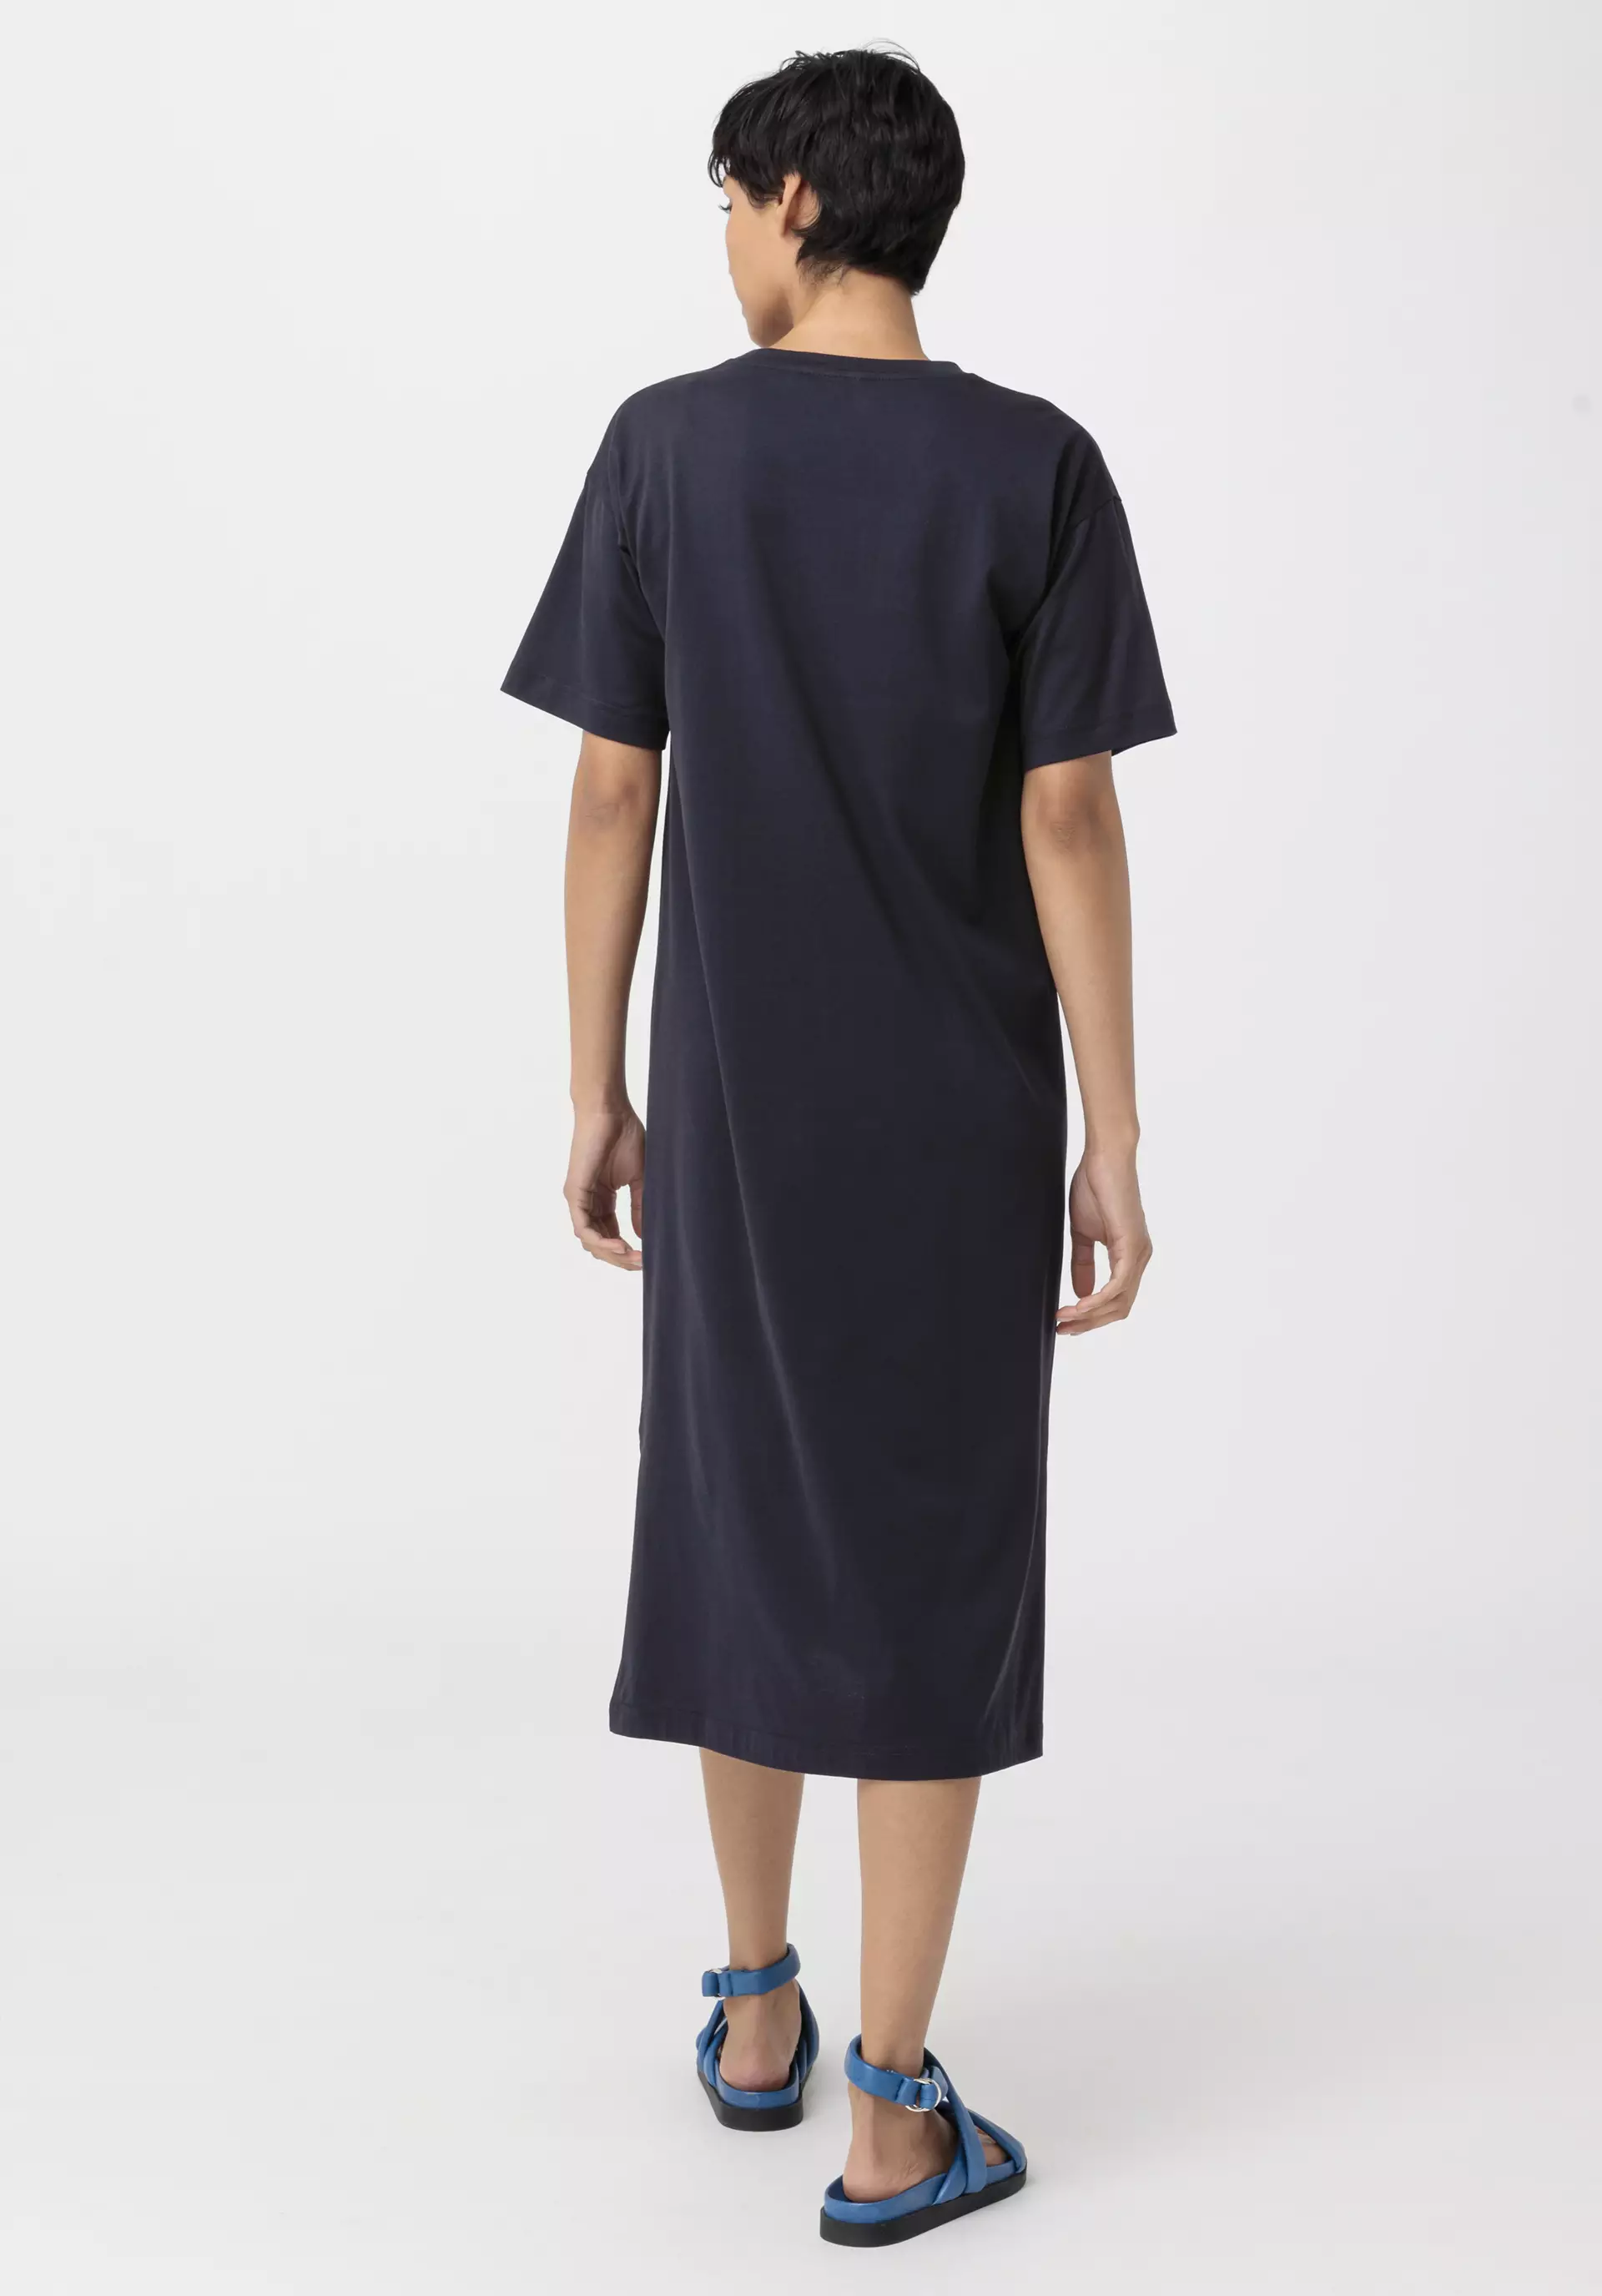 Jersey dress made from pure organic cotton - 1